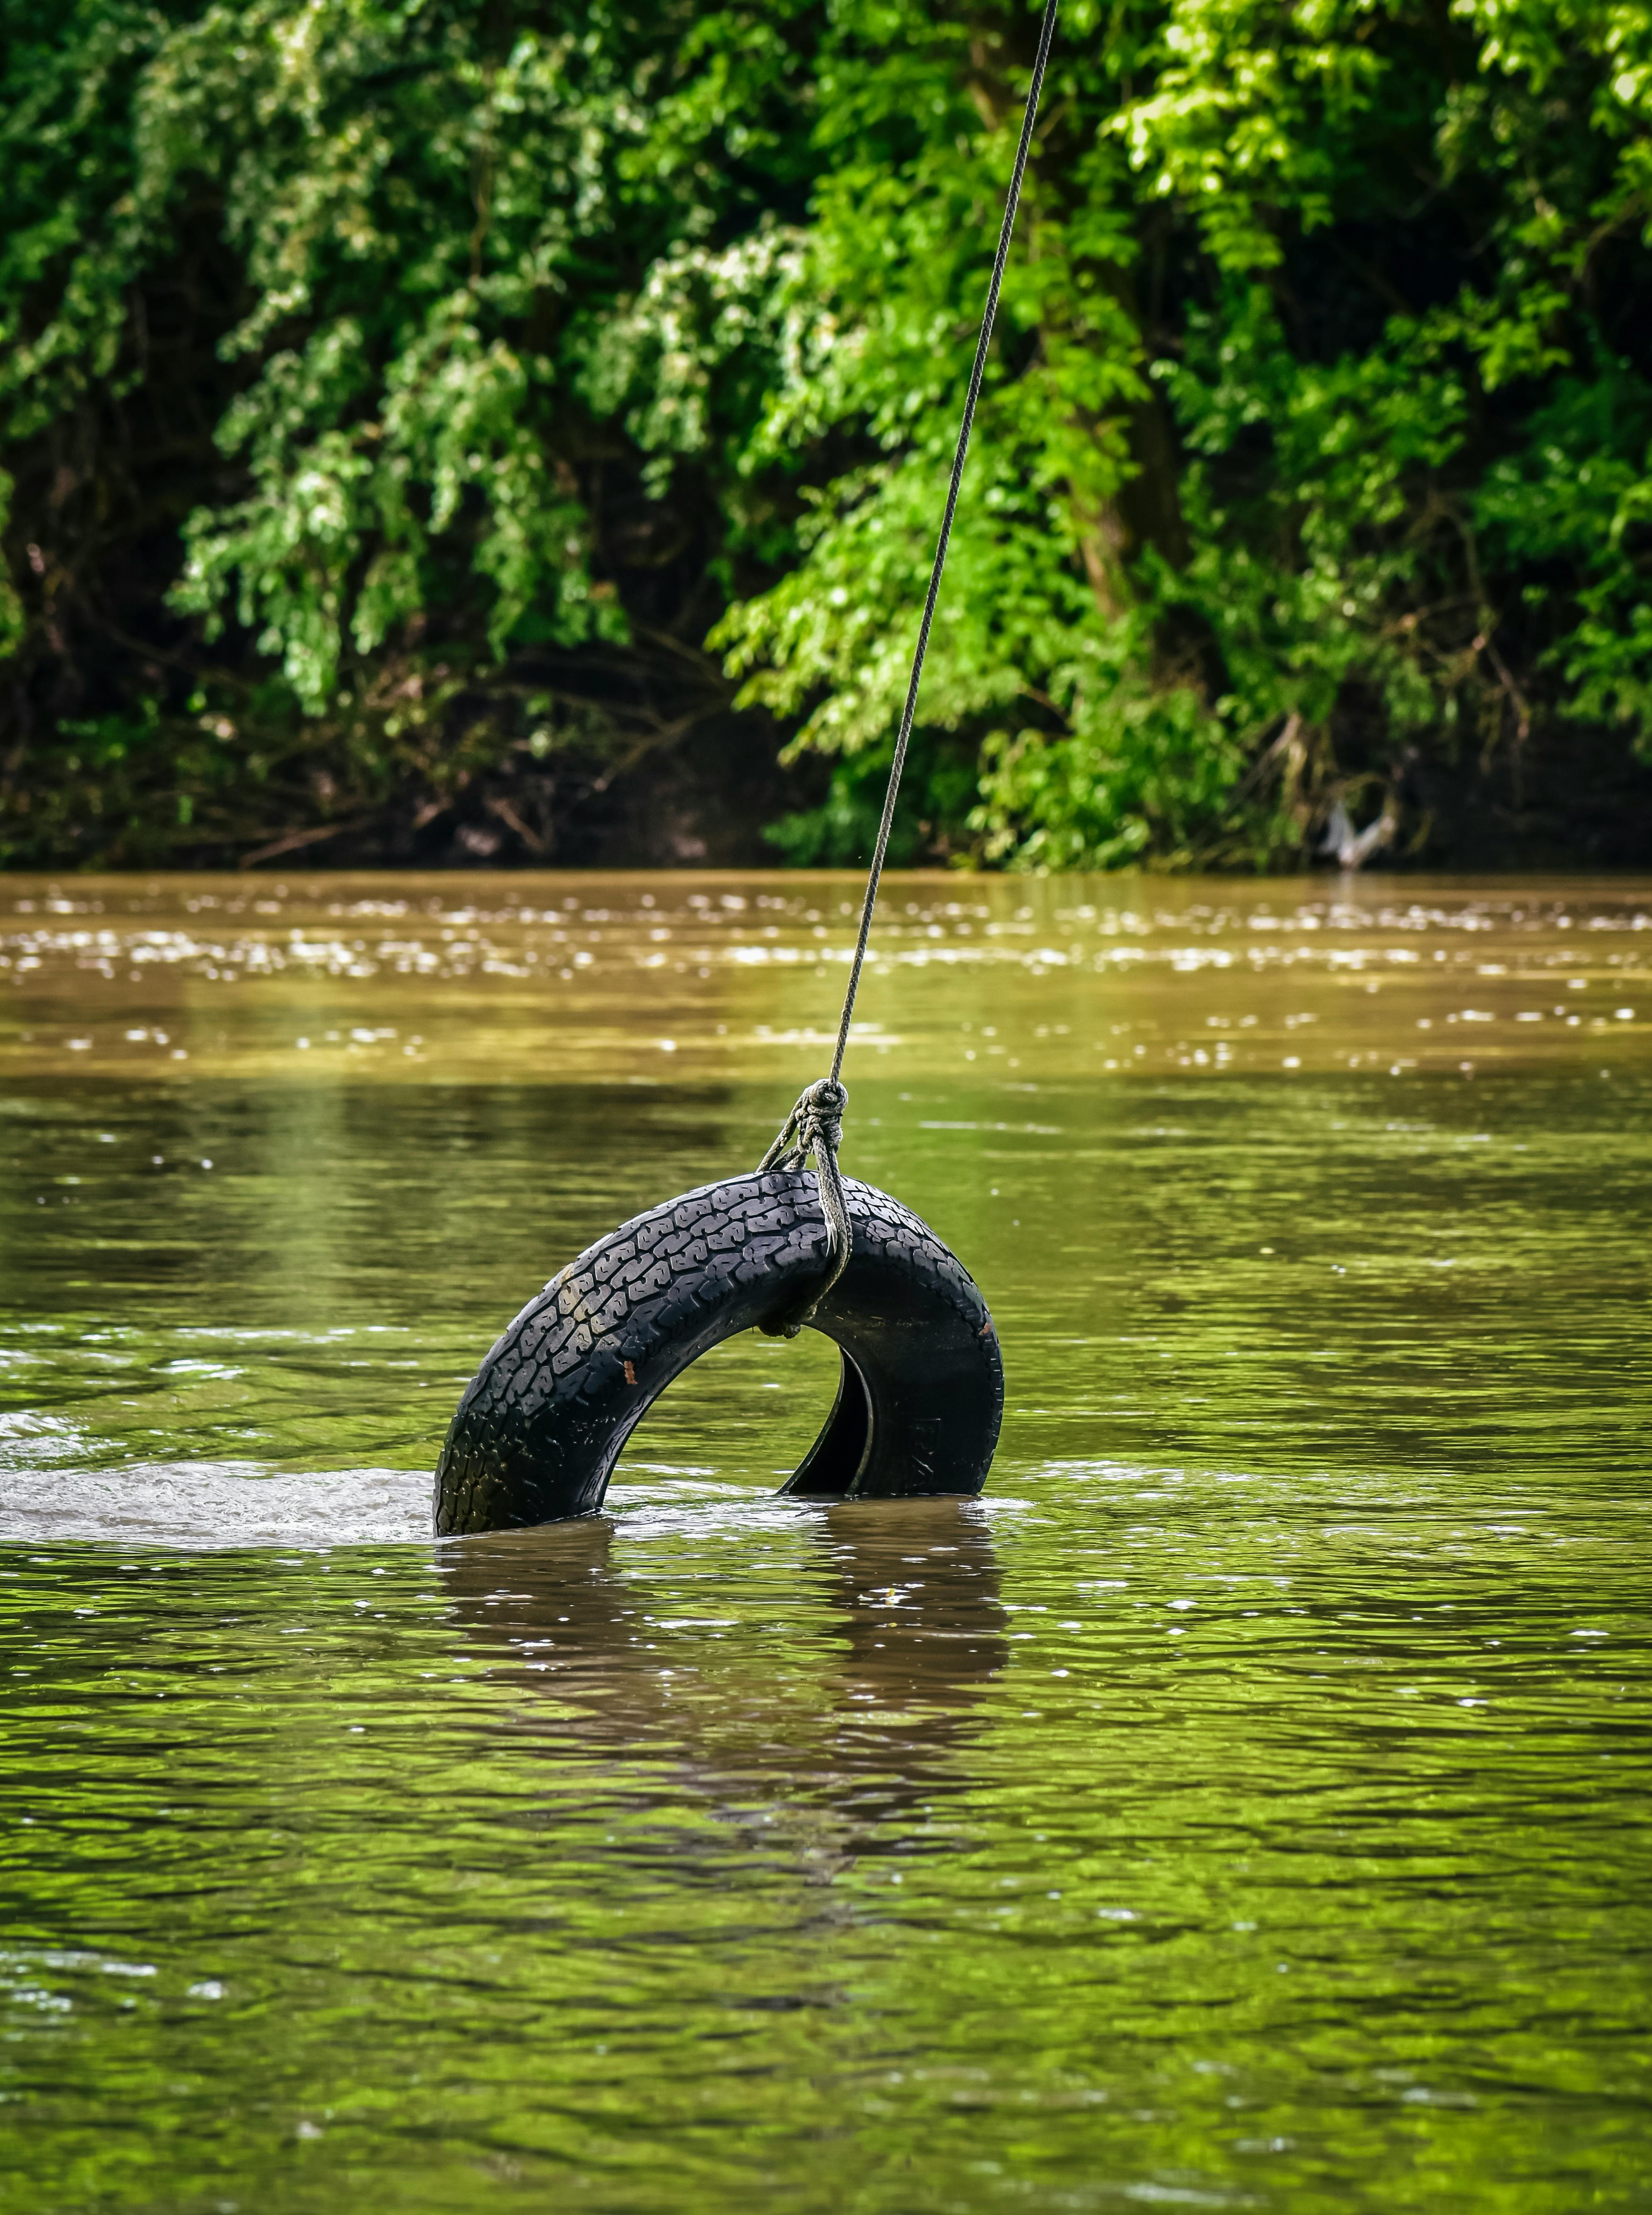 Tire rope swing over lake in park · Free Stock Photo